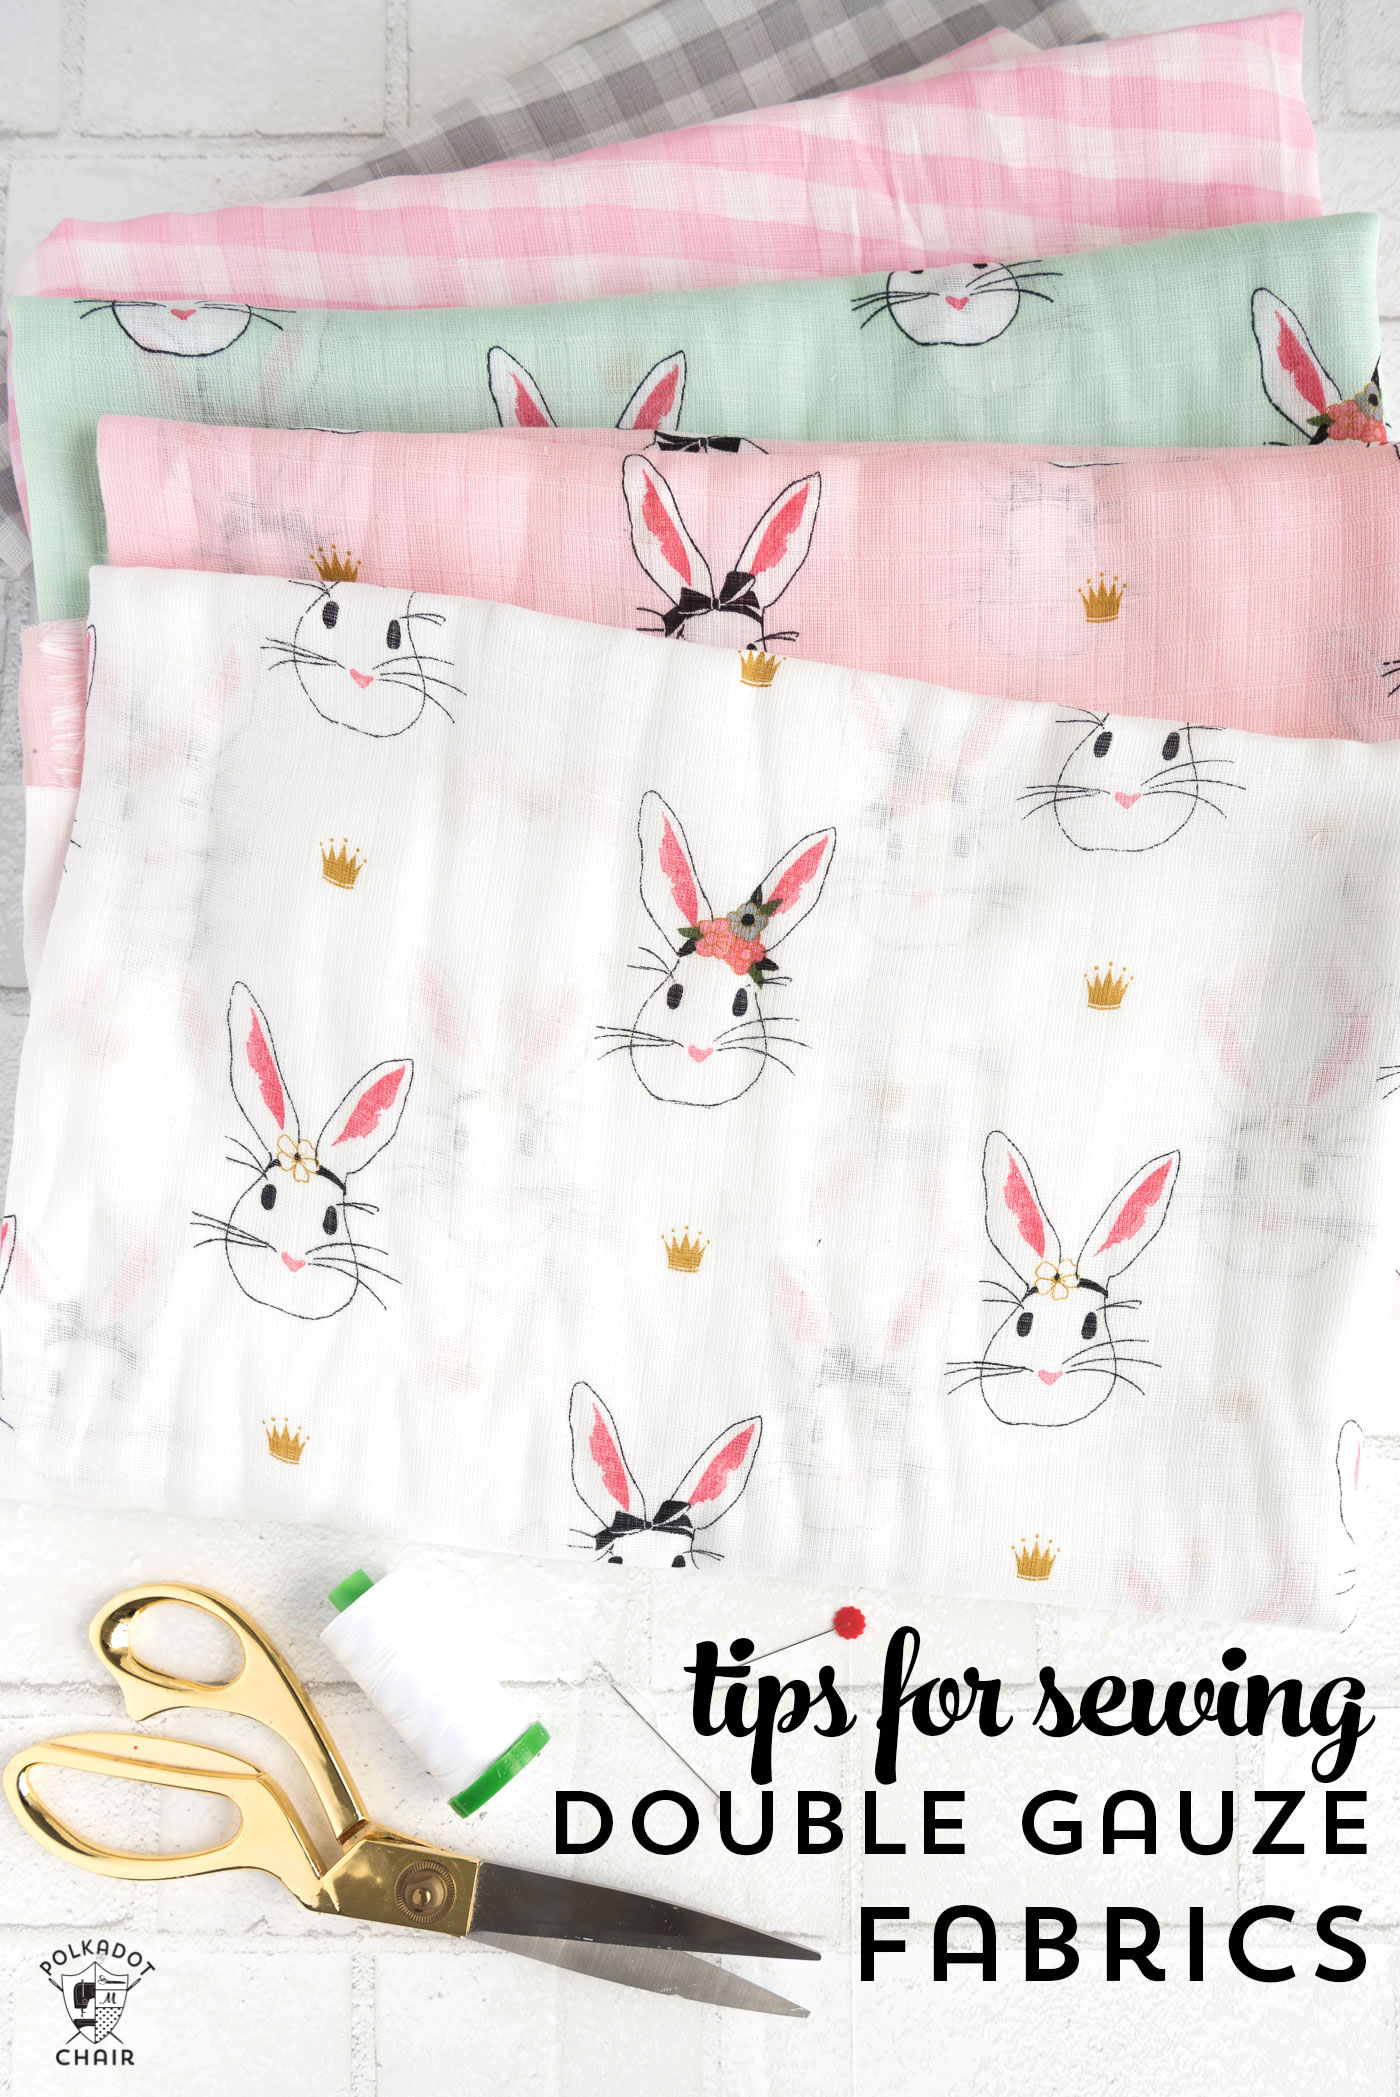 Tips for sewing with double gauze fabrics and double gauze fabric project ideas and care guidelines